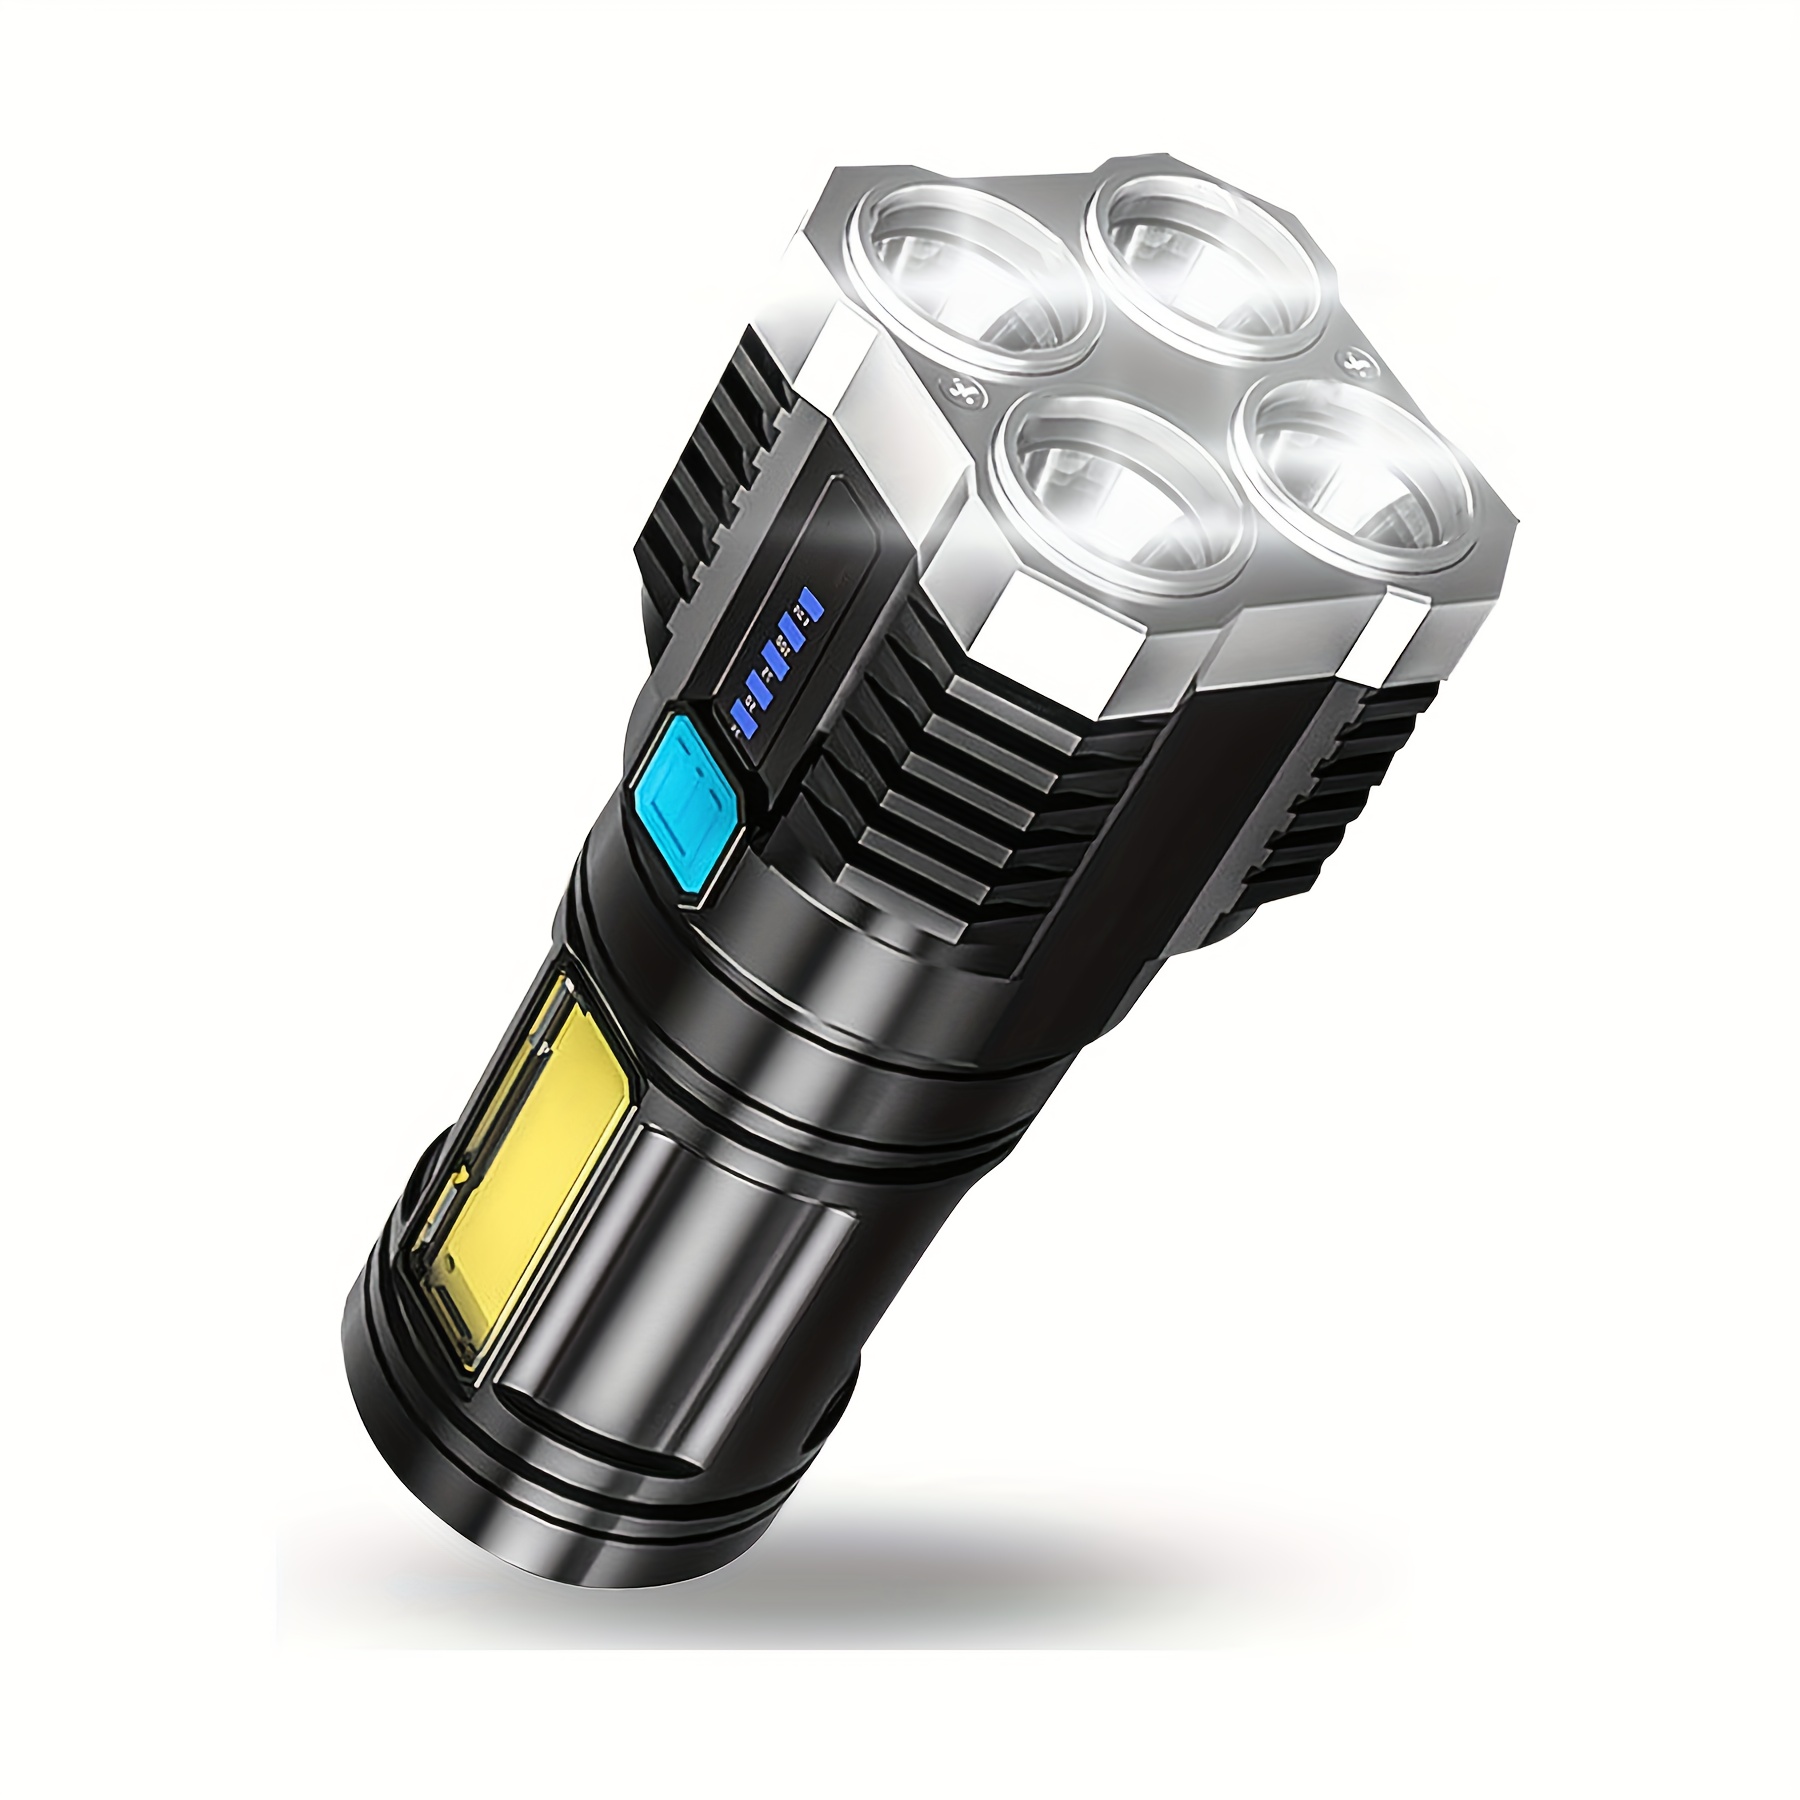 

Rechargeable Led Handheld Flashlight, 10000 Lumens With 4 Light Beads, Waterproof, Usb Powered With Lithium Battery, Included Usb Cable, Portable For Night Camping, Hiking, And Emergency Use